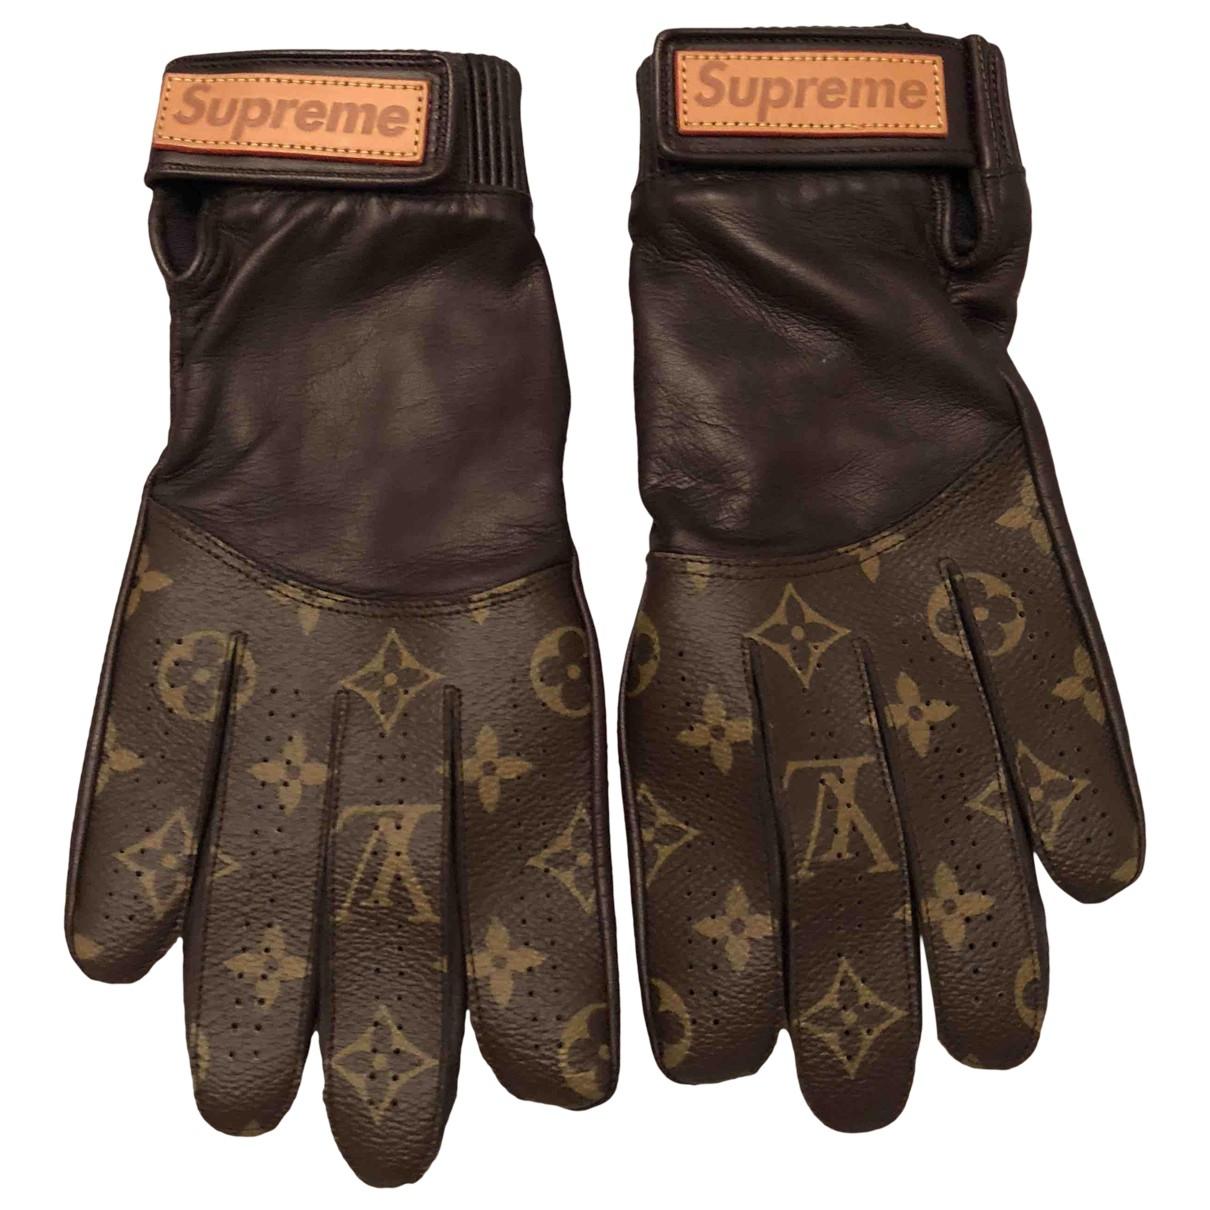 Louis Vuitton Leather Gloves in Brown for Men - Lyst